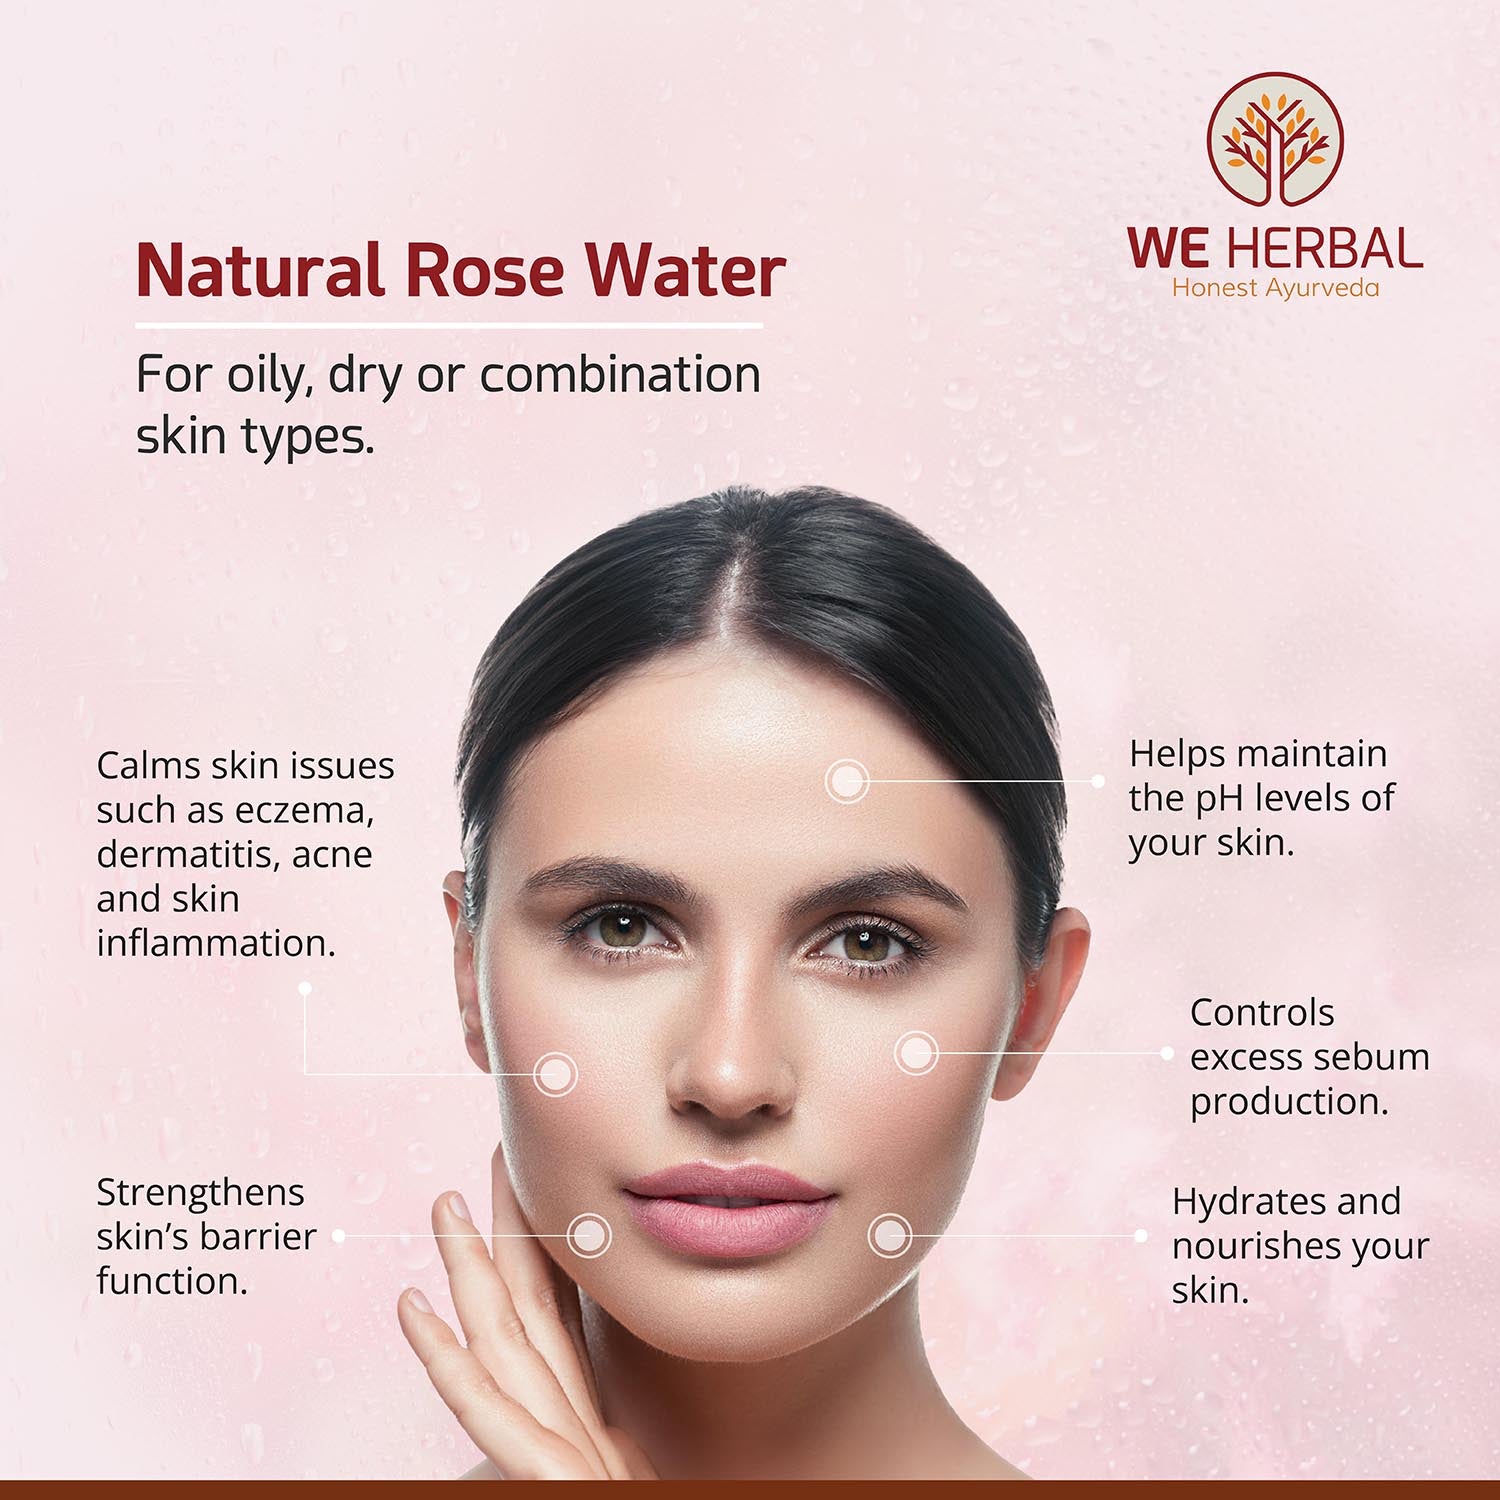 Herbal Face Mask & Natural Rose Water Combo We Herbal | Back to the Nature